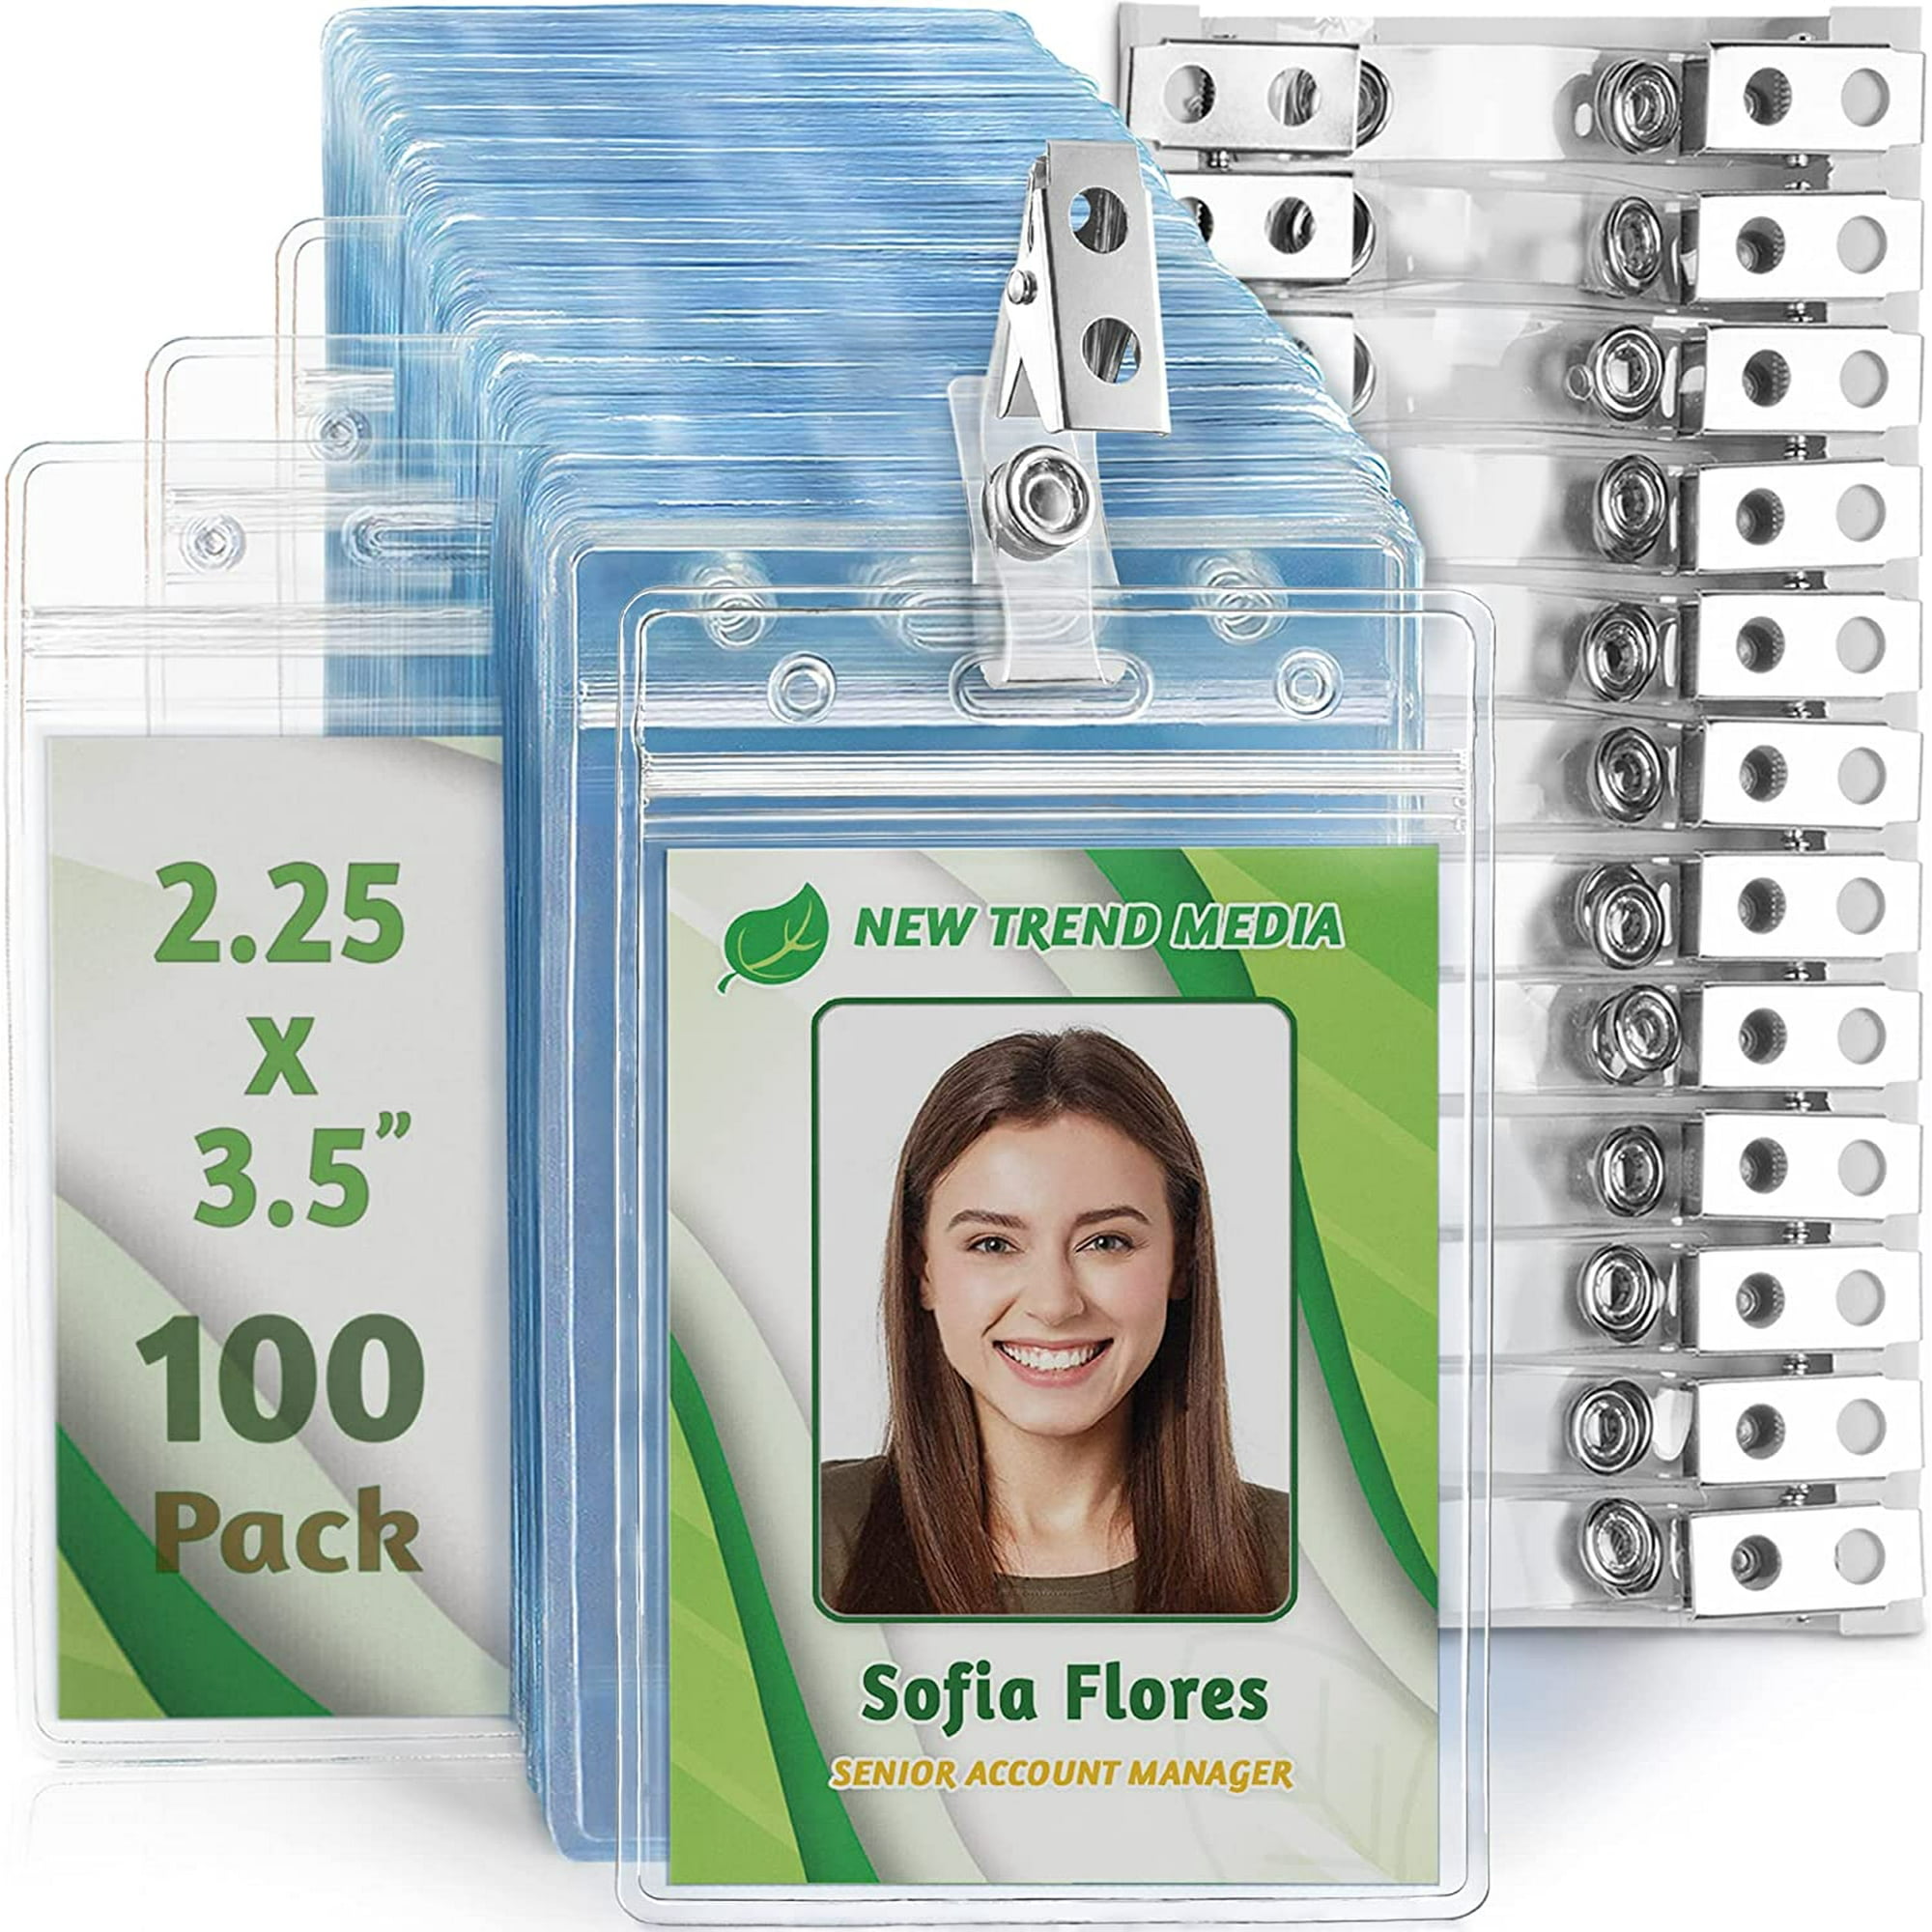 Clear Vinyl ID Badge Card Holder (Pack of 100)